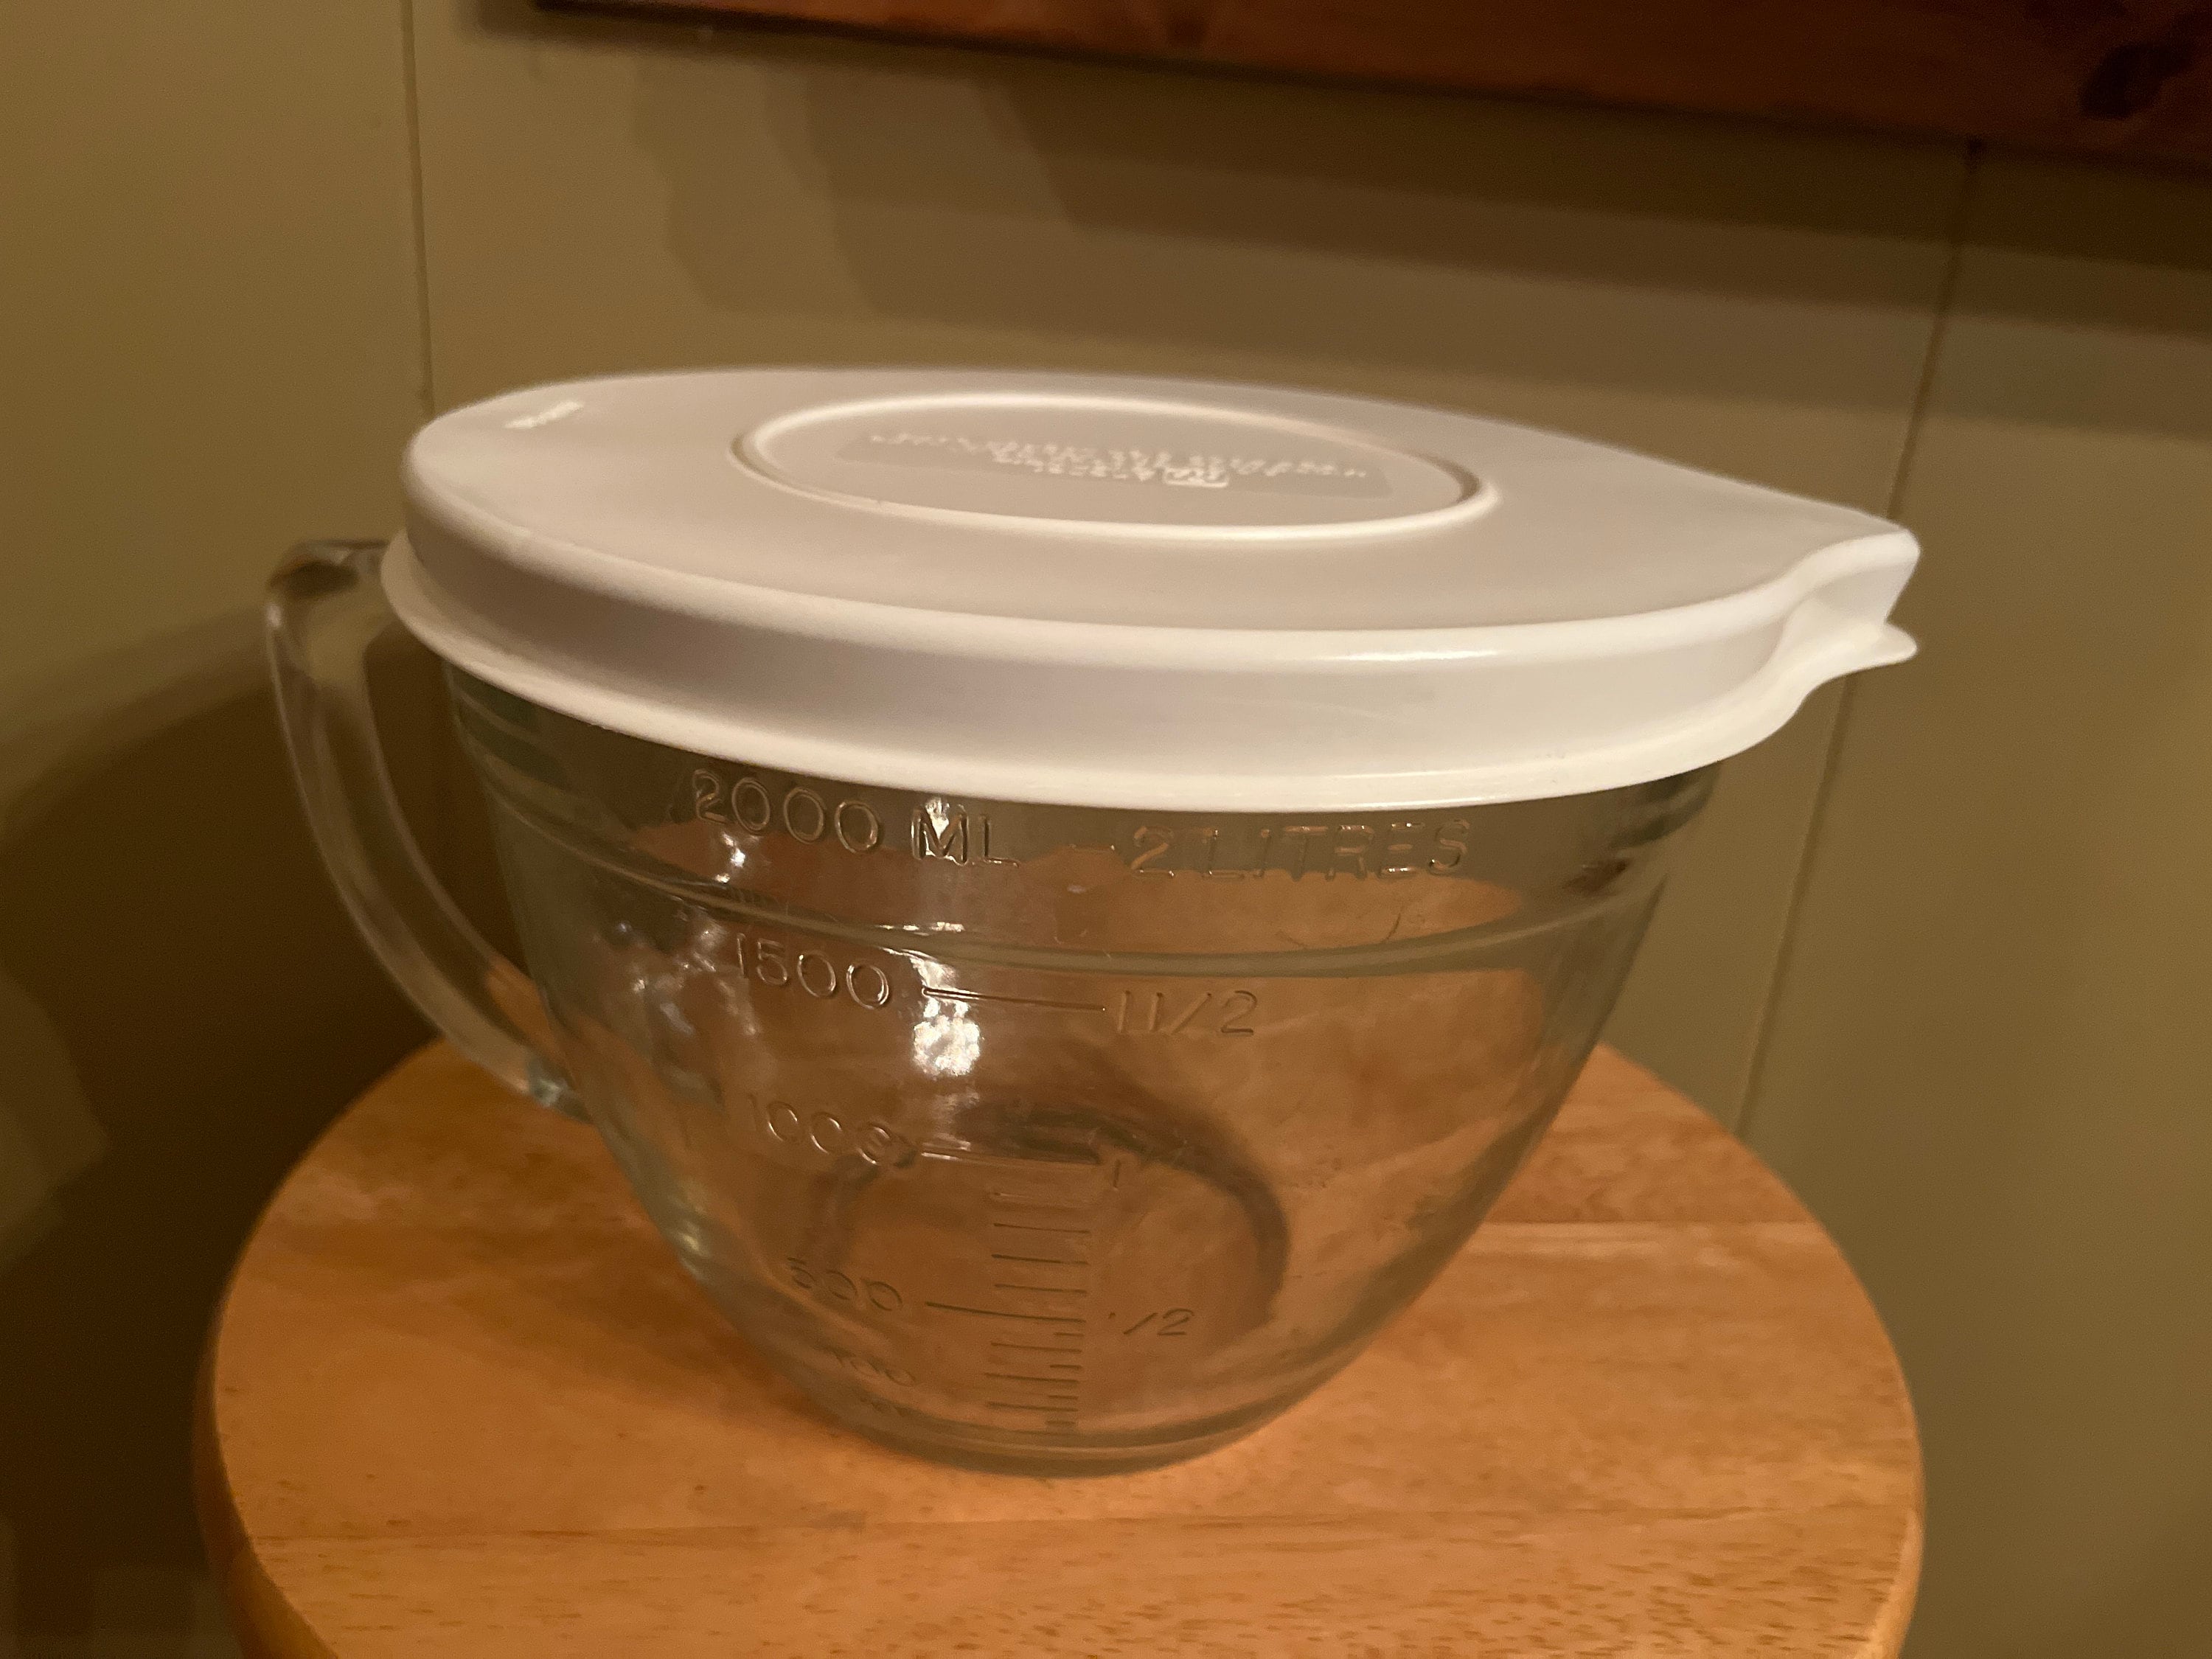 The Pampered Chef Glass Measuring Cup - 64 Oz - 8 Cups 2 Liter